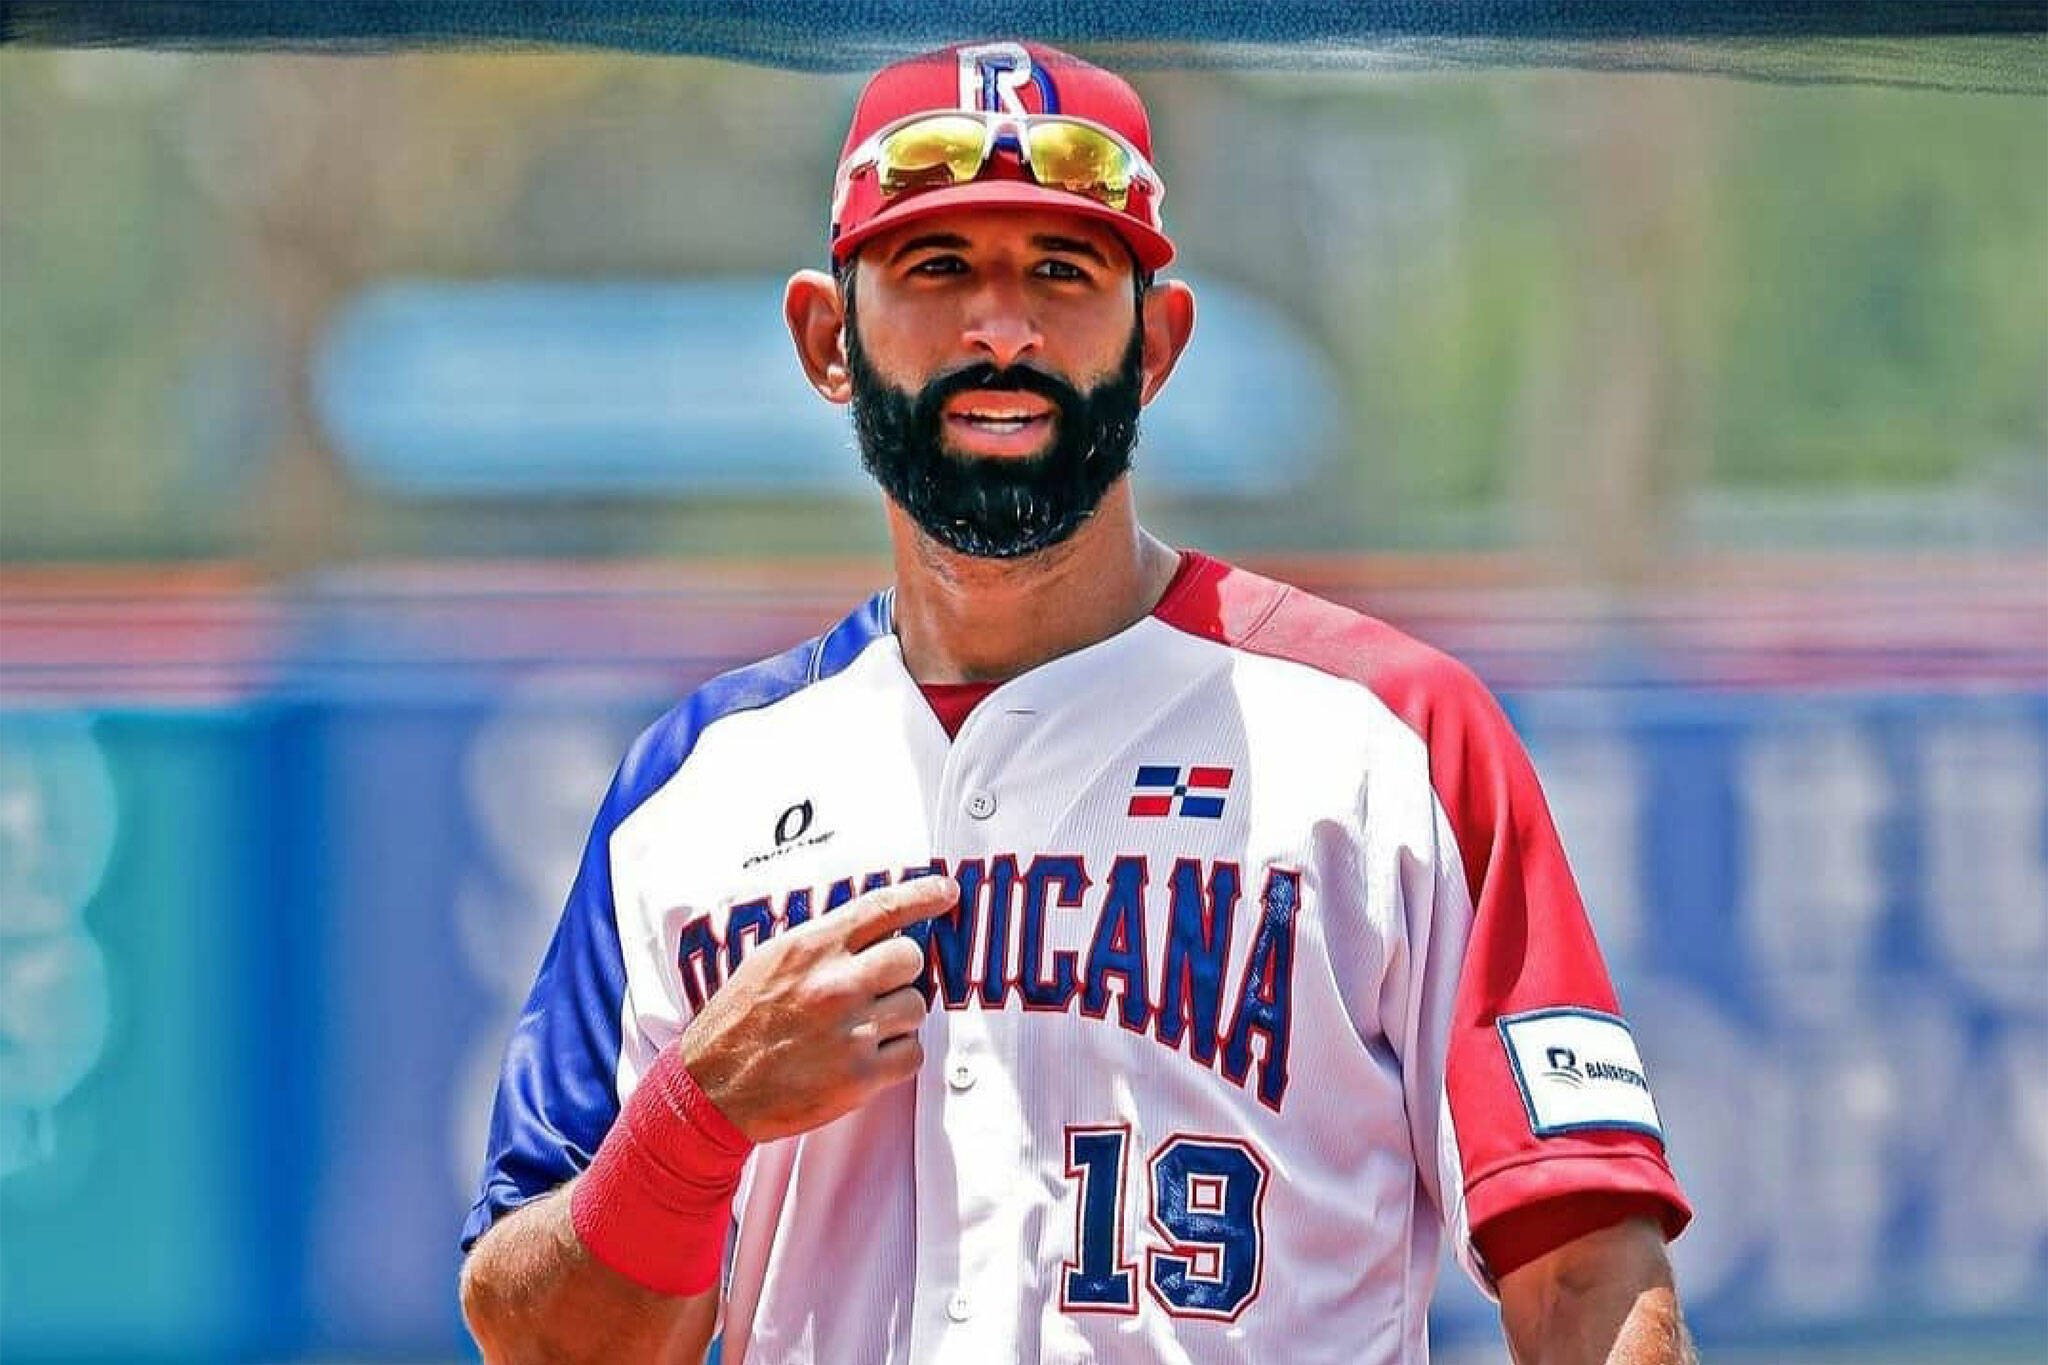 Blue Jays all-time great Jose Bautista is now playing in the Tokyo Olympics